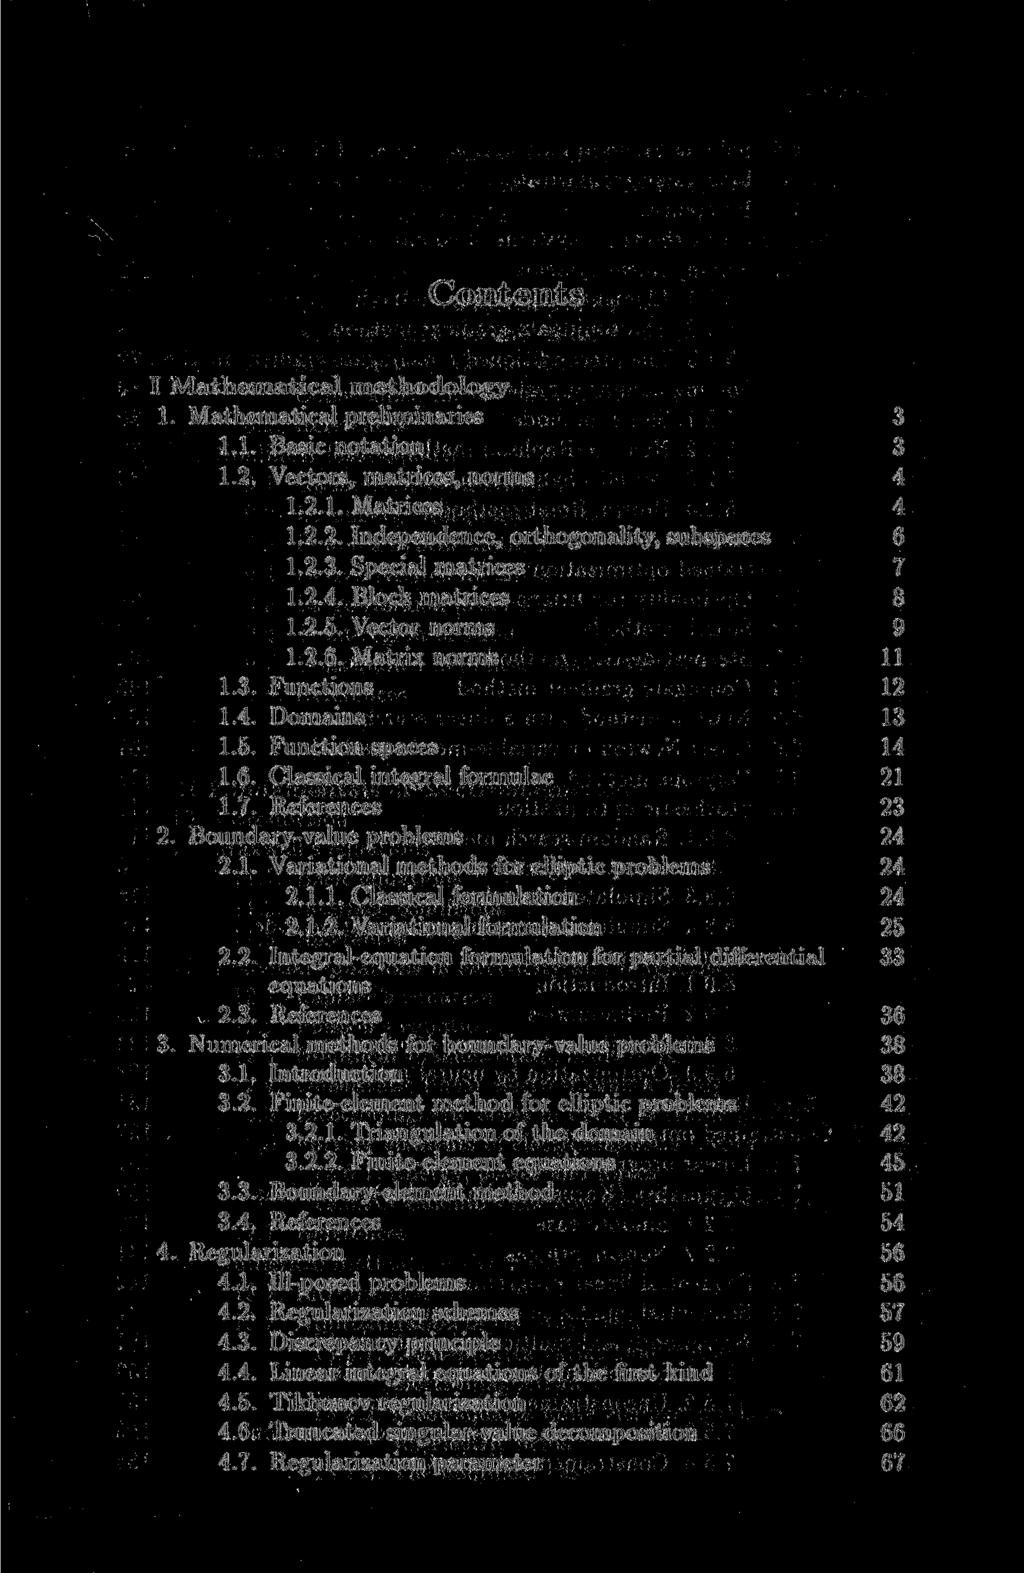 Contents I Mathematical methodology 1. Mathematical preliminaries 3 1.1. Basic notation 3 1.2. Vectors, matrices, norms 4 1.2.1. Matrices 4 1.2.2. Independence, orthogonality, subspaces 6 1.2.3. Special matrices 7 1.